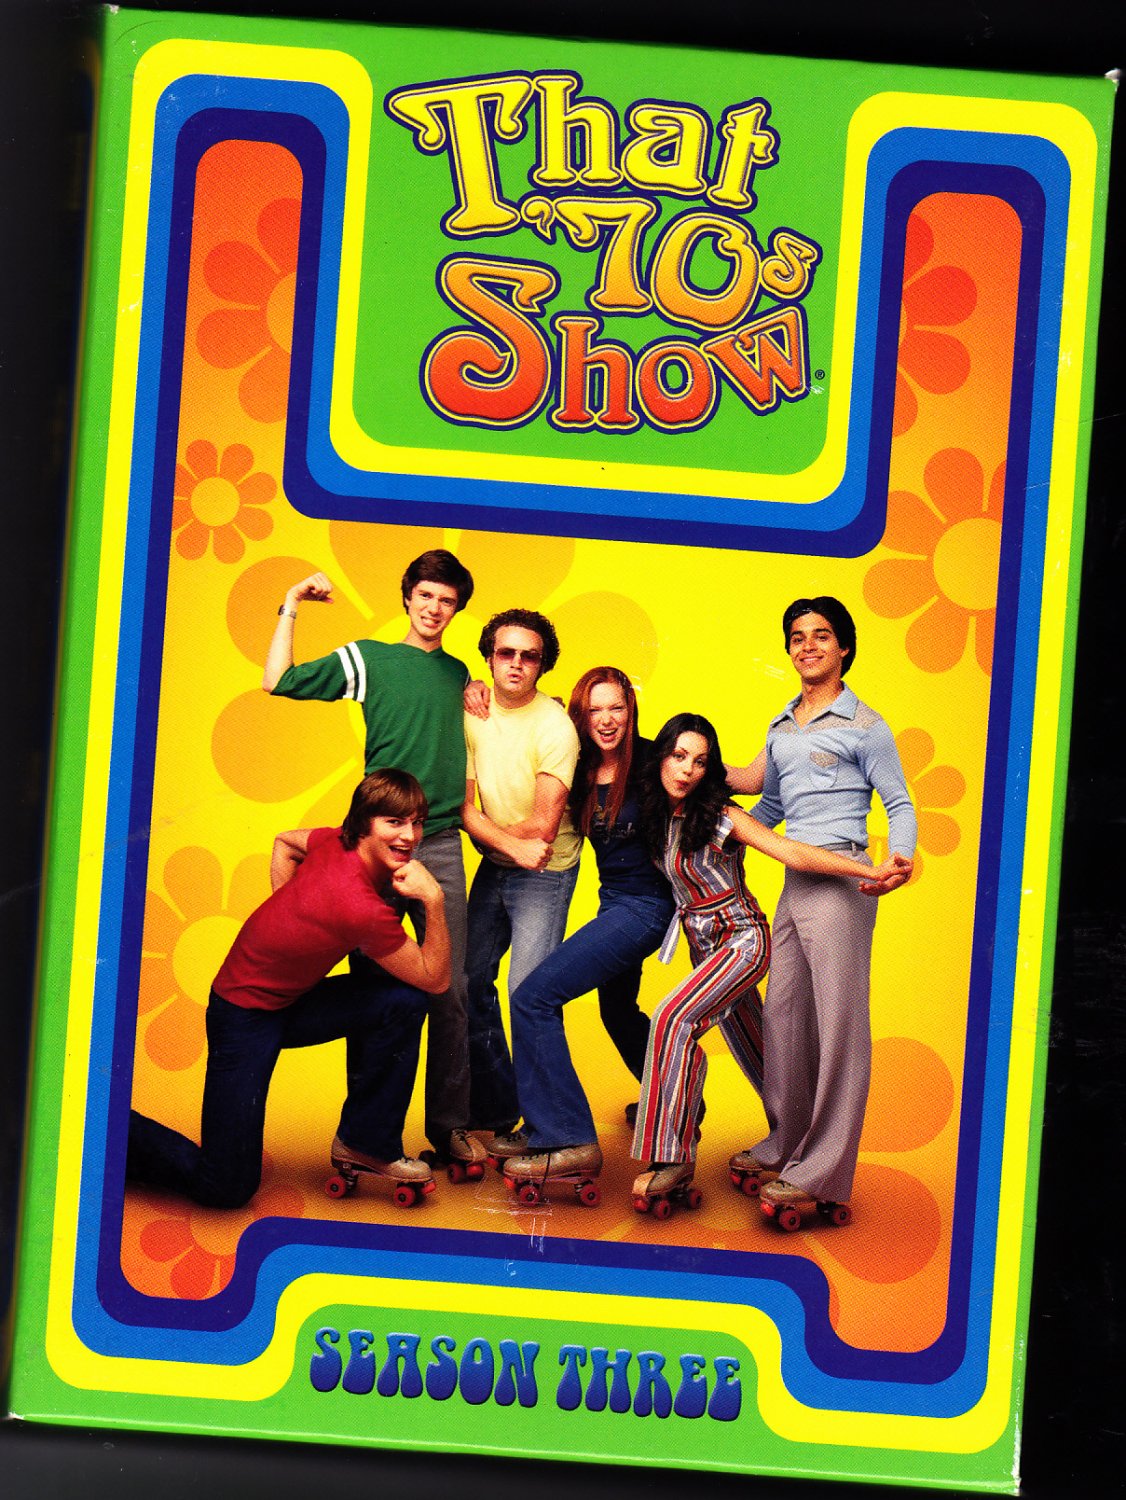 That 70s Show - Complete 3rd Season DVD 2005, 4-Disc Set - Very Good